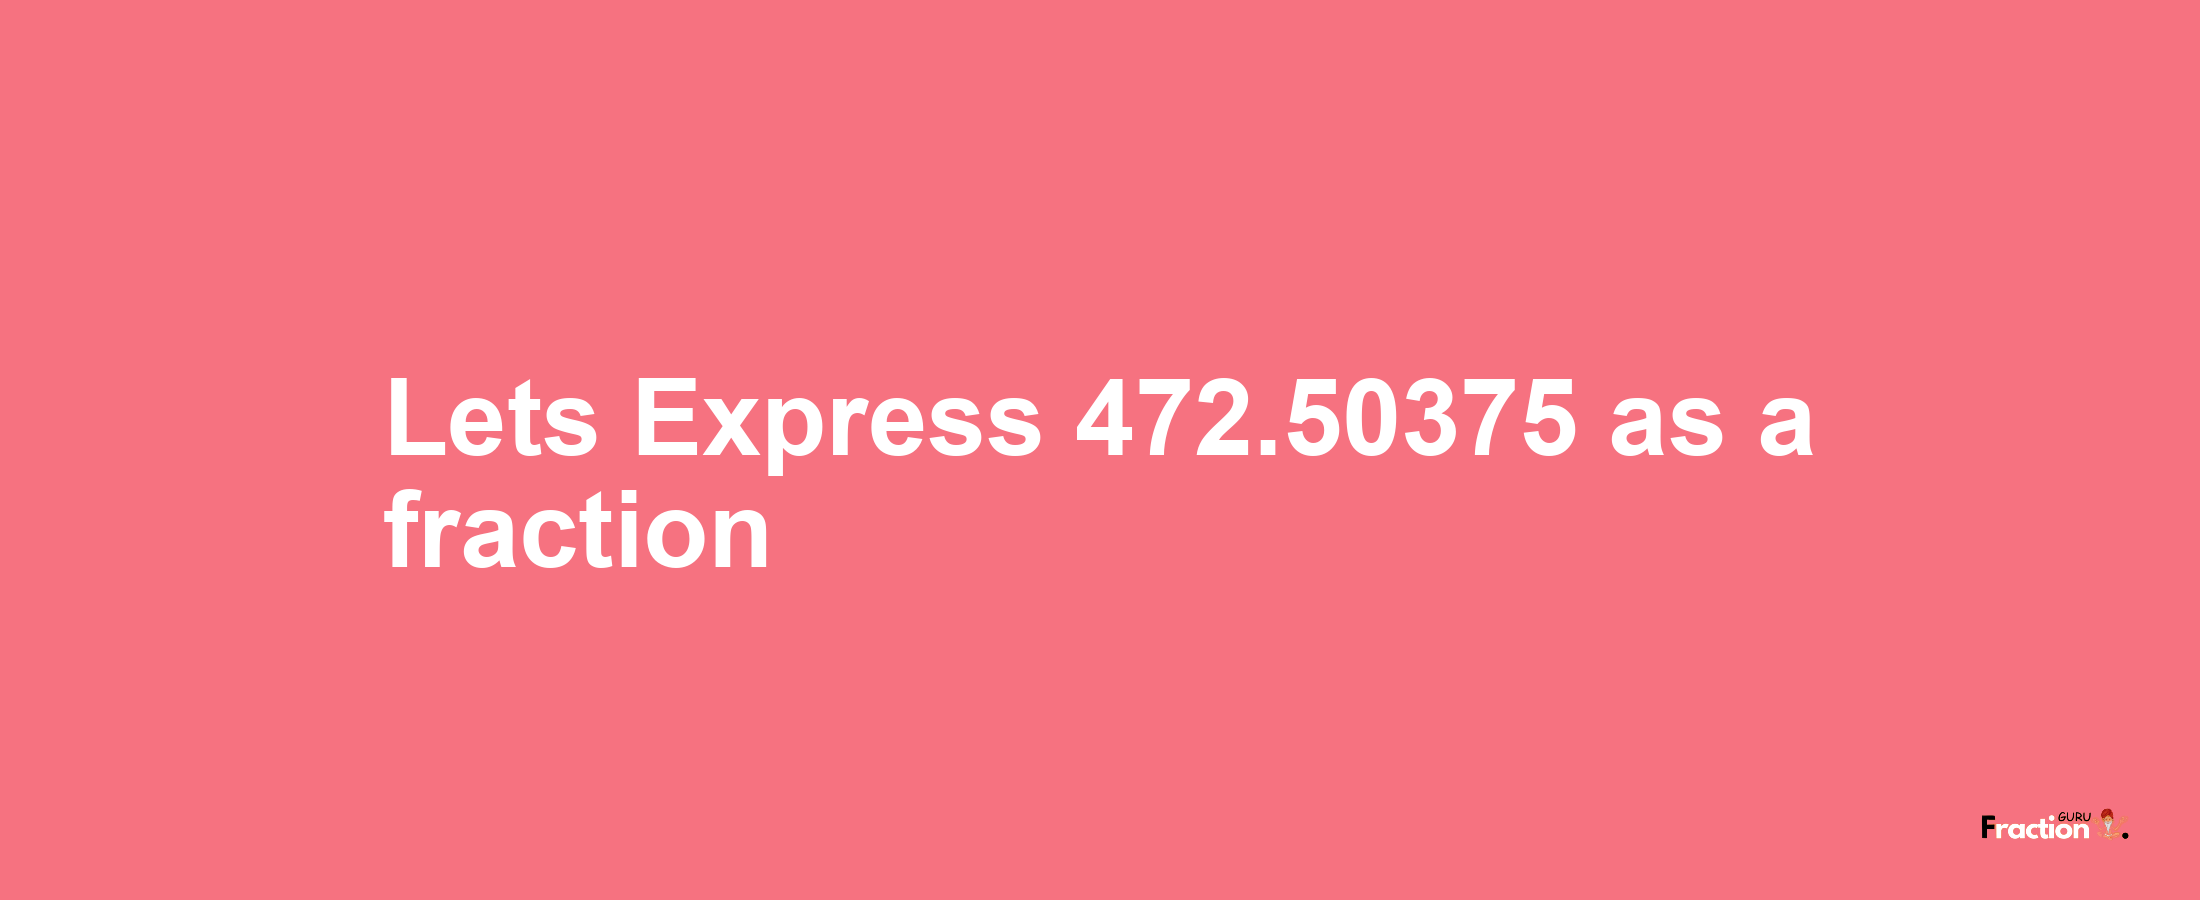 Lets Express 472.50375 as afraction